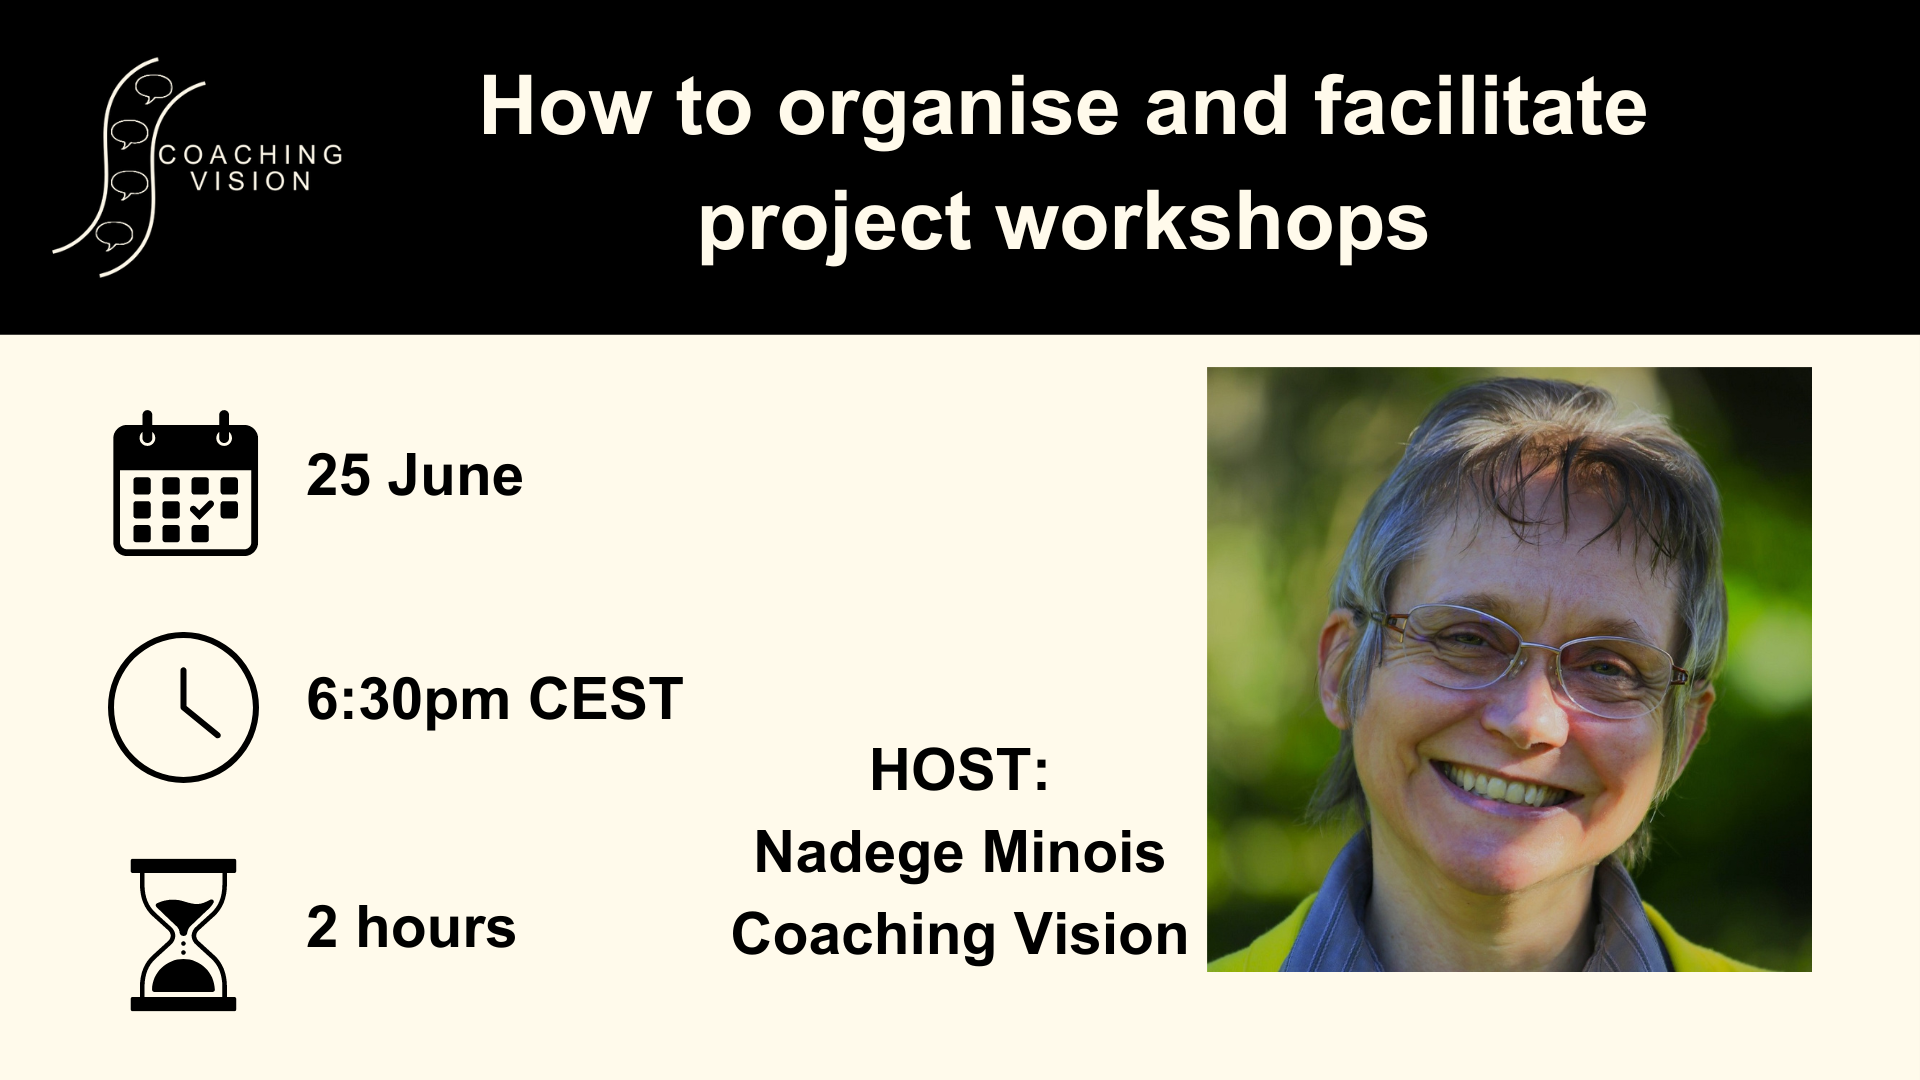 How to organise and facilitate project workshops